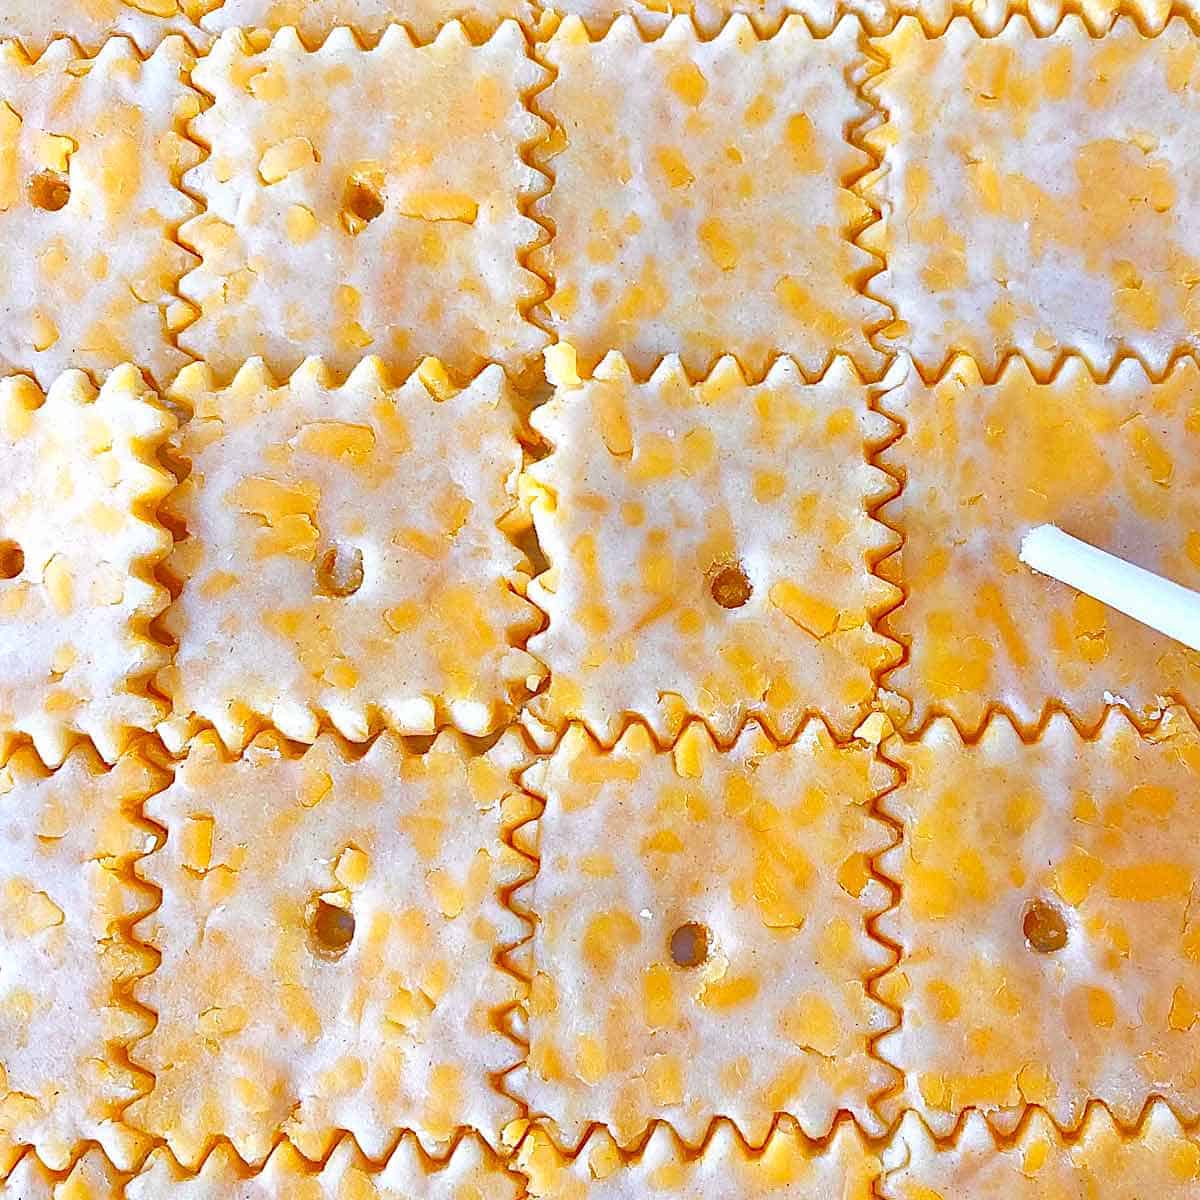 Poking holes with a skewer in cut cheese crackers dough.